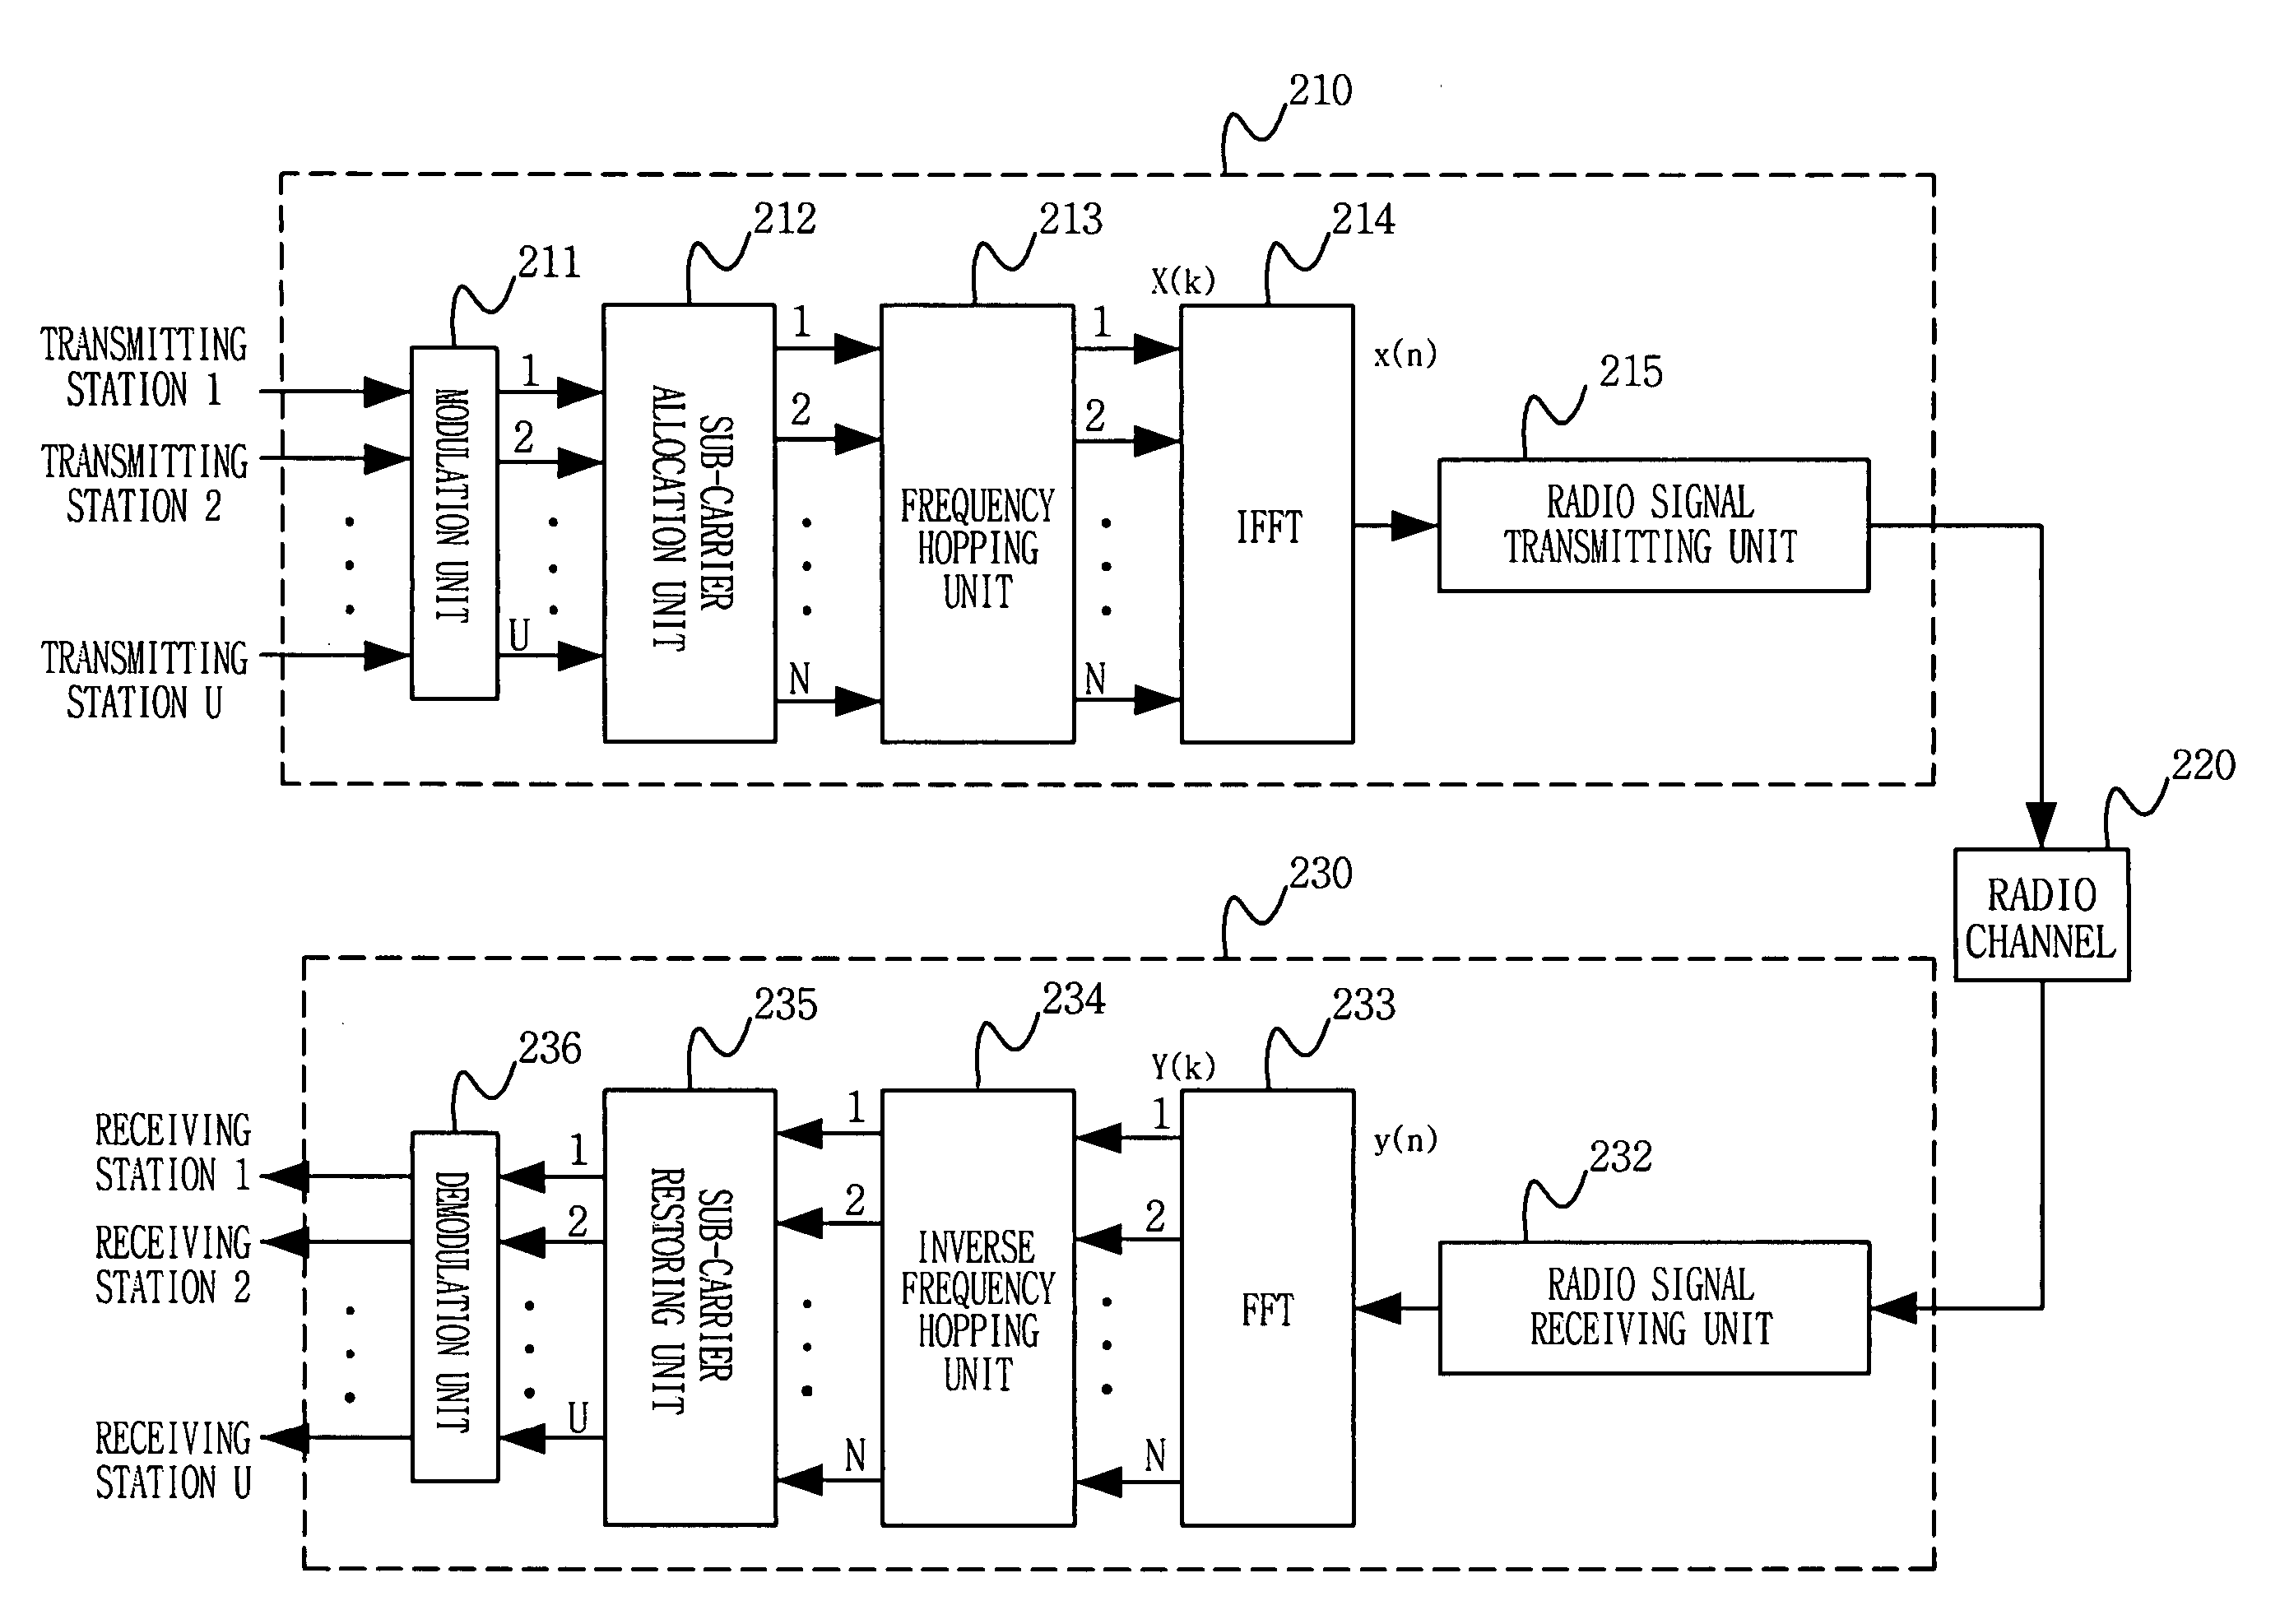 Frequency hopping ofdma method using symbols of comb pattern